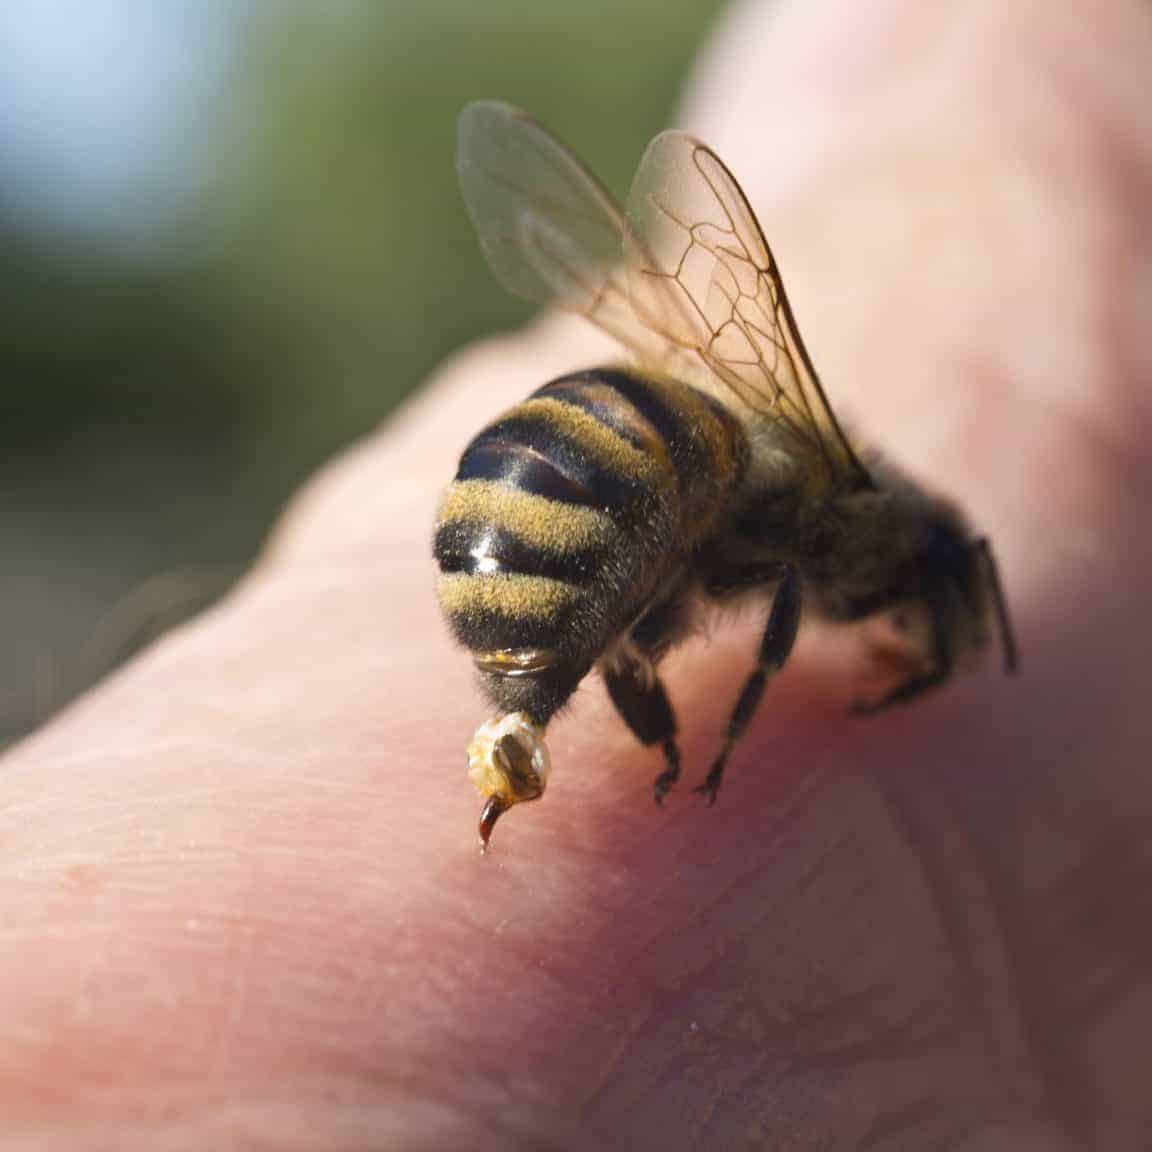 What Are The Impacts Of Worker Bee Stings?